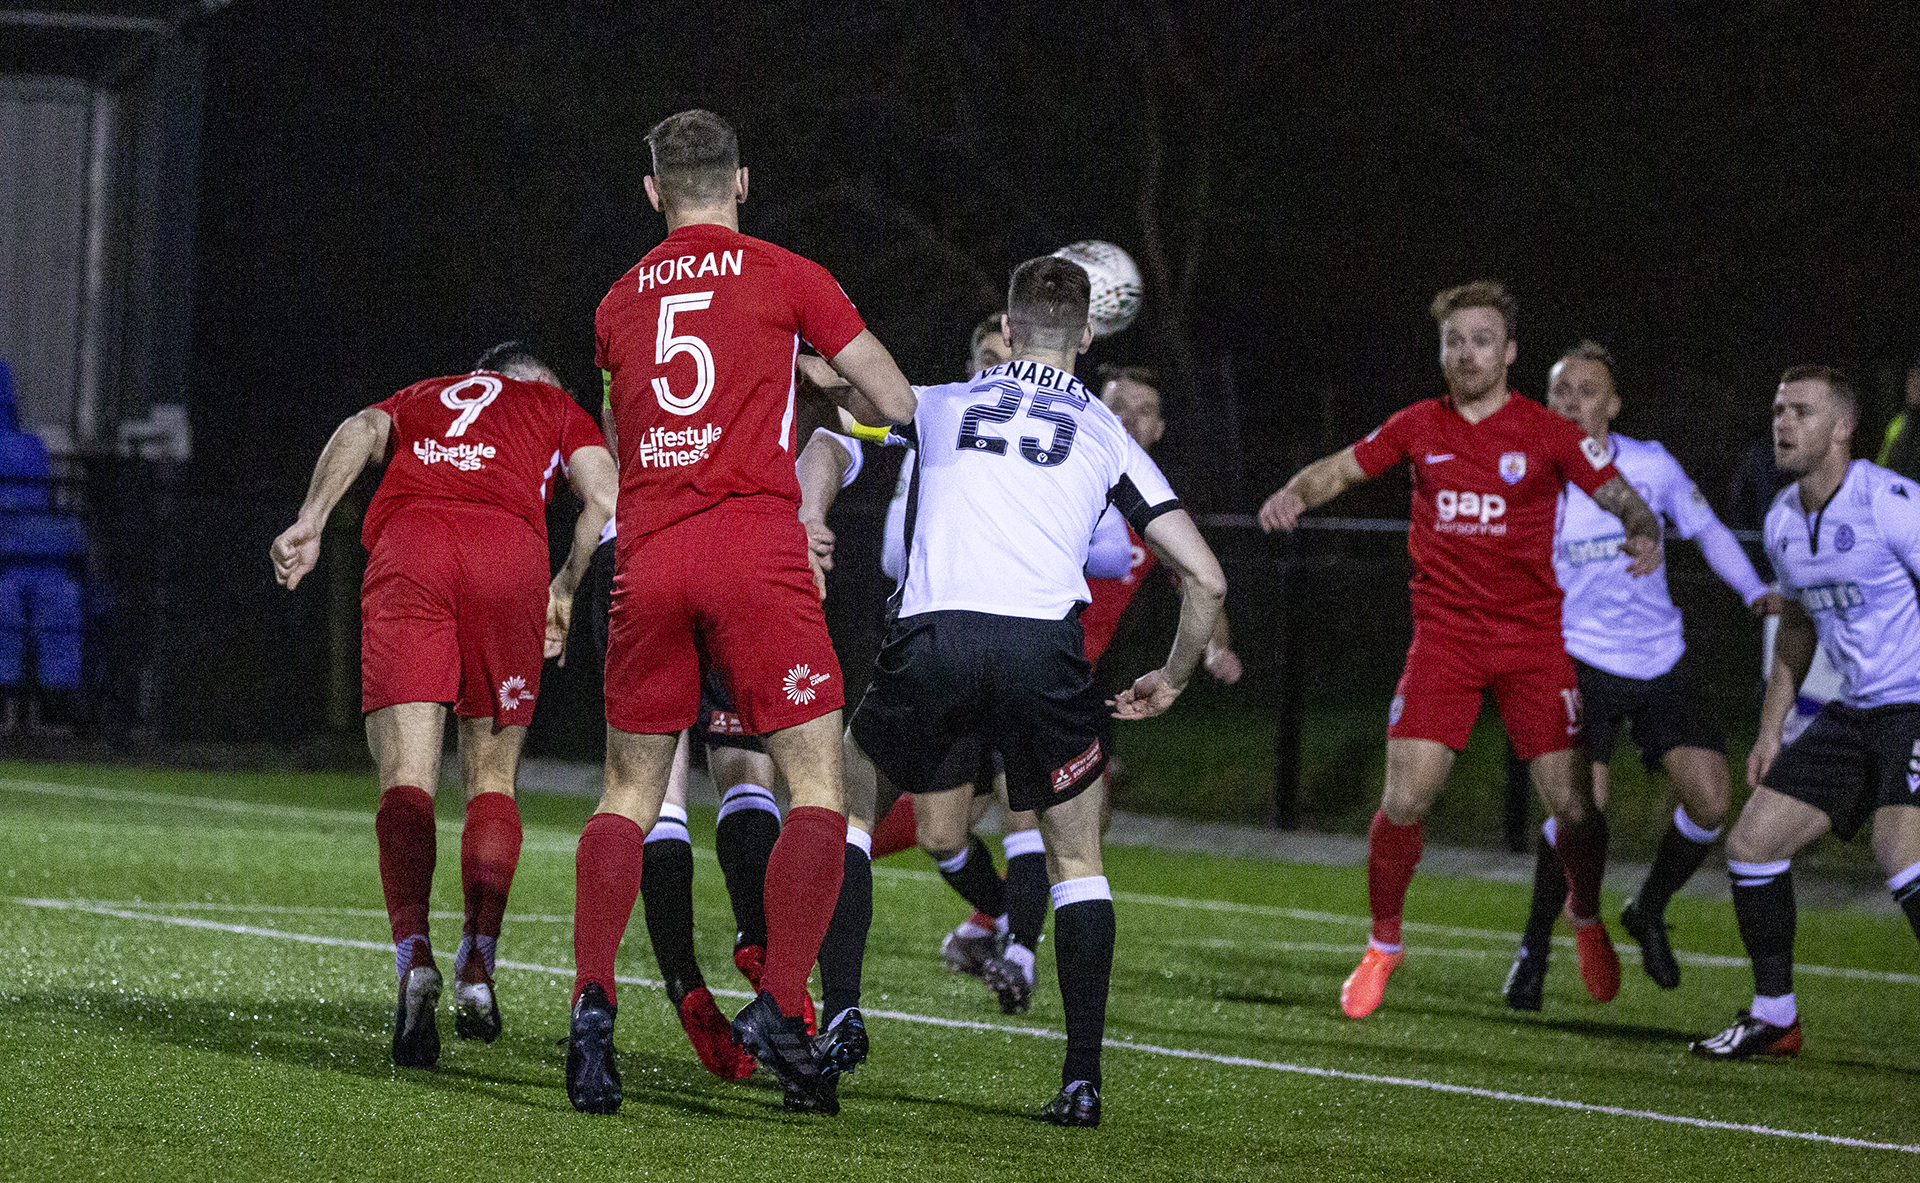 Mike Wilde heads The Nomads in front after just 3 minutes | © NCM Media